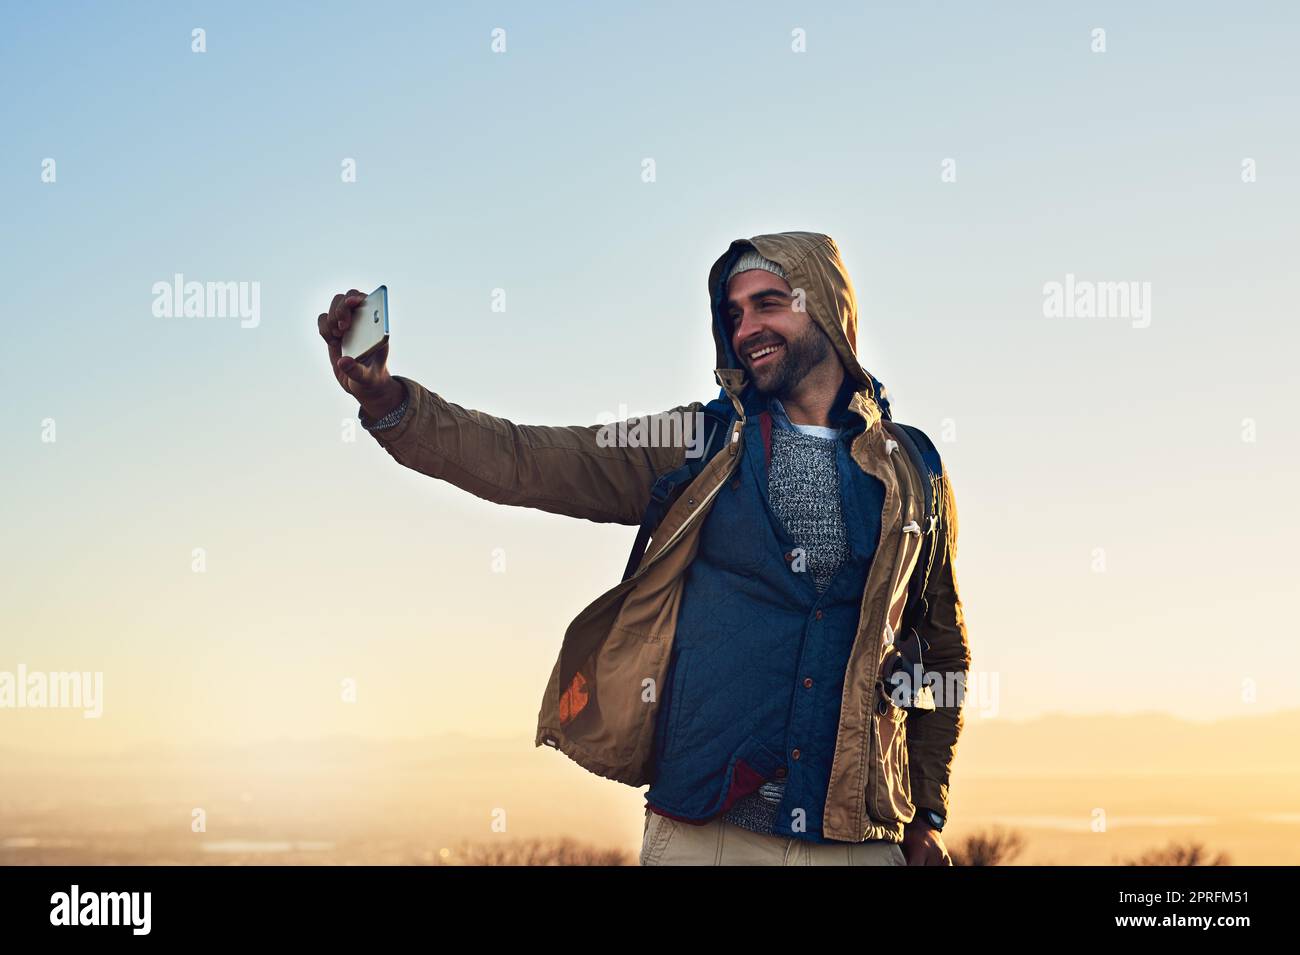 These photos will be great for my online profile. a hiker on top of a mountain taking a photo of himself. Stock Photo